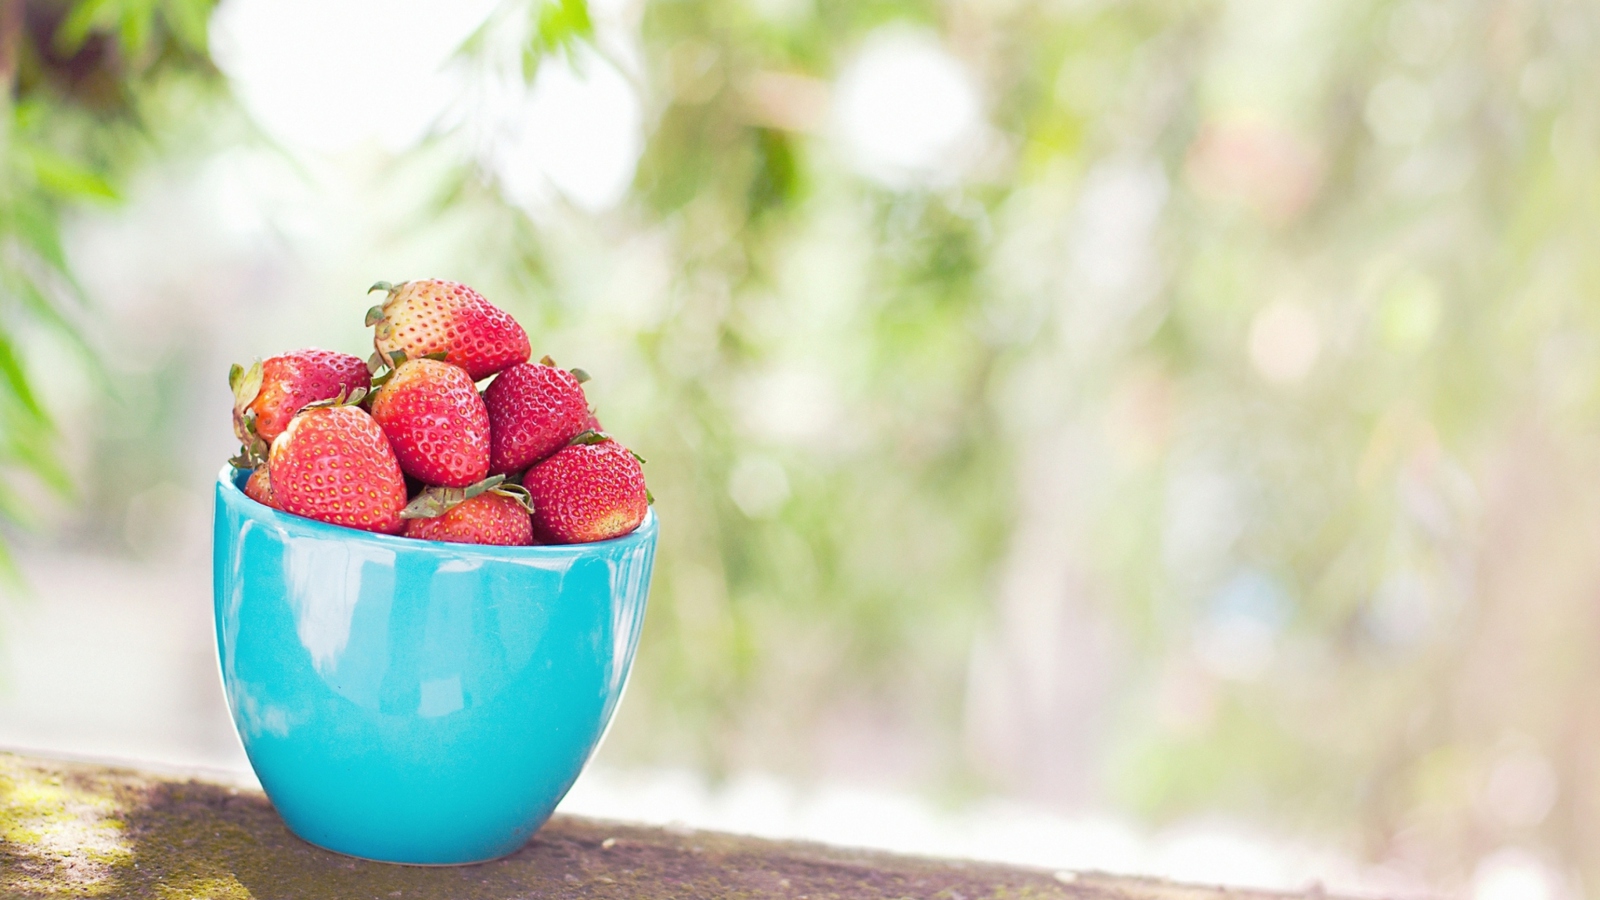 Strawberries In Blue Cup wallpaper 1600x900